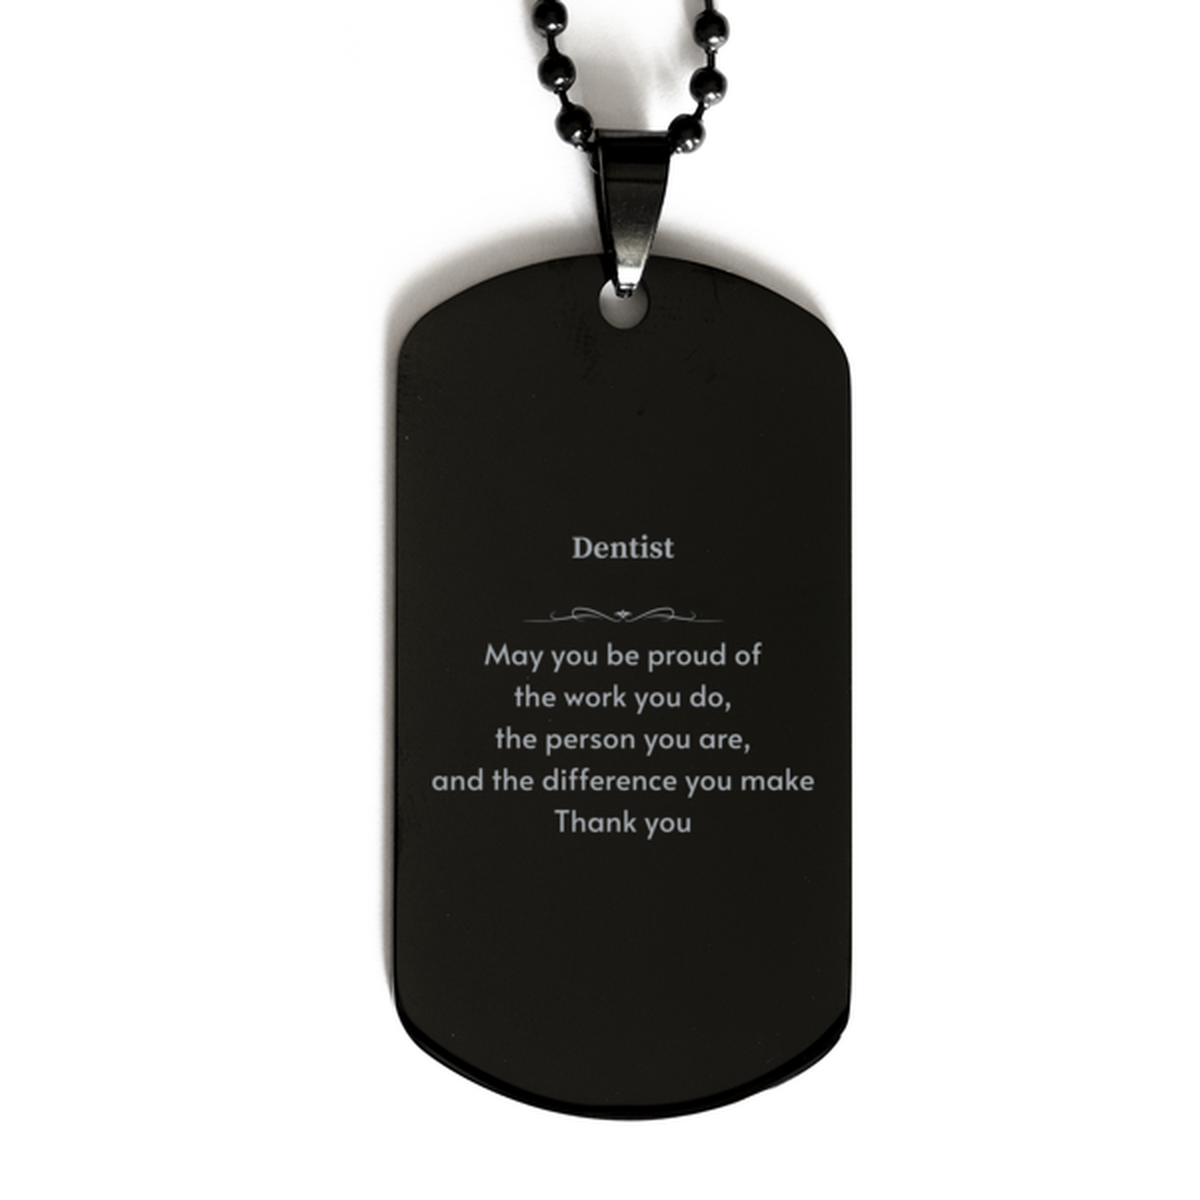 Heartwarming Black Dog Tag Retirement Coworkers Gifts for Dentist, Dentist May You be proud of the work you do, the person you are Gifts for Boss Men Women Friends